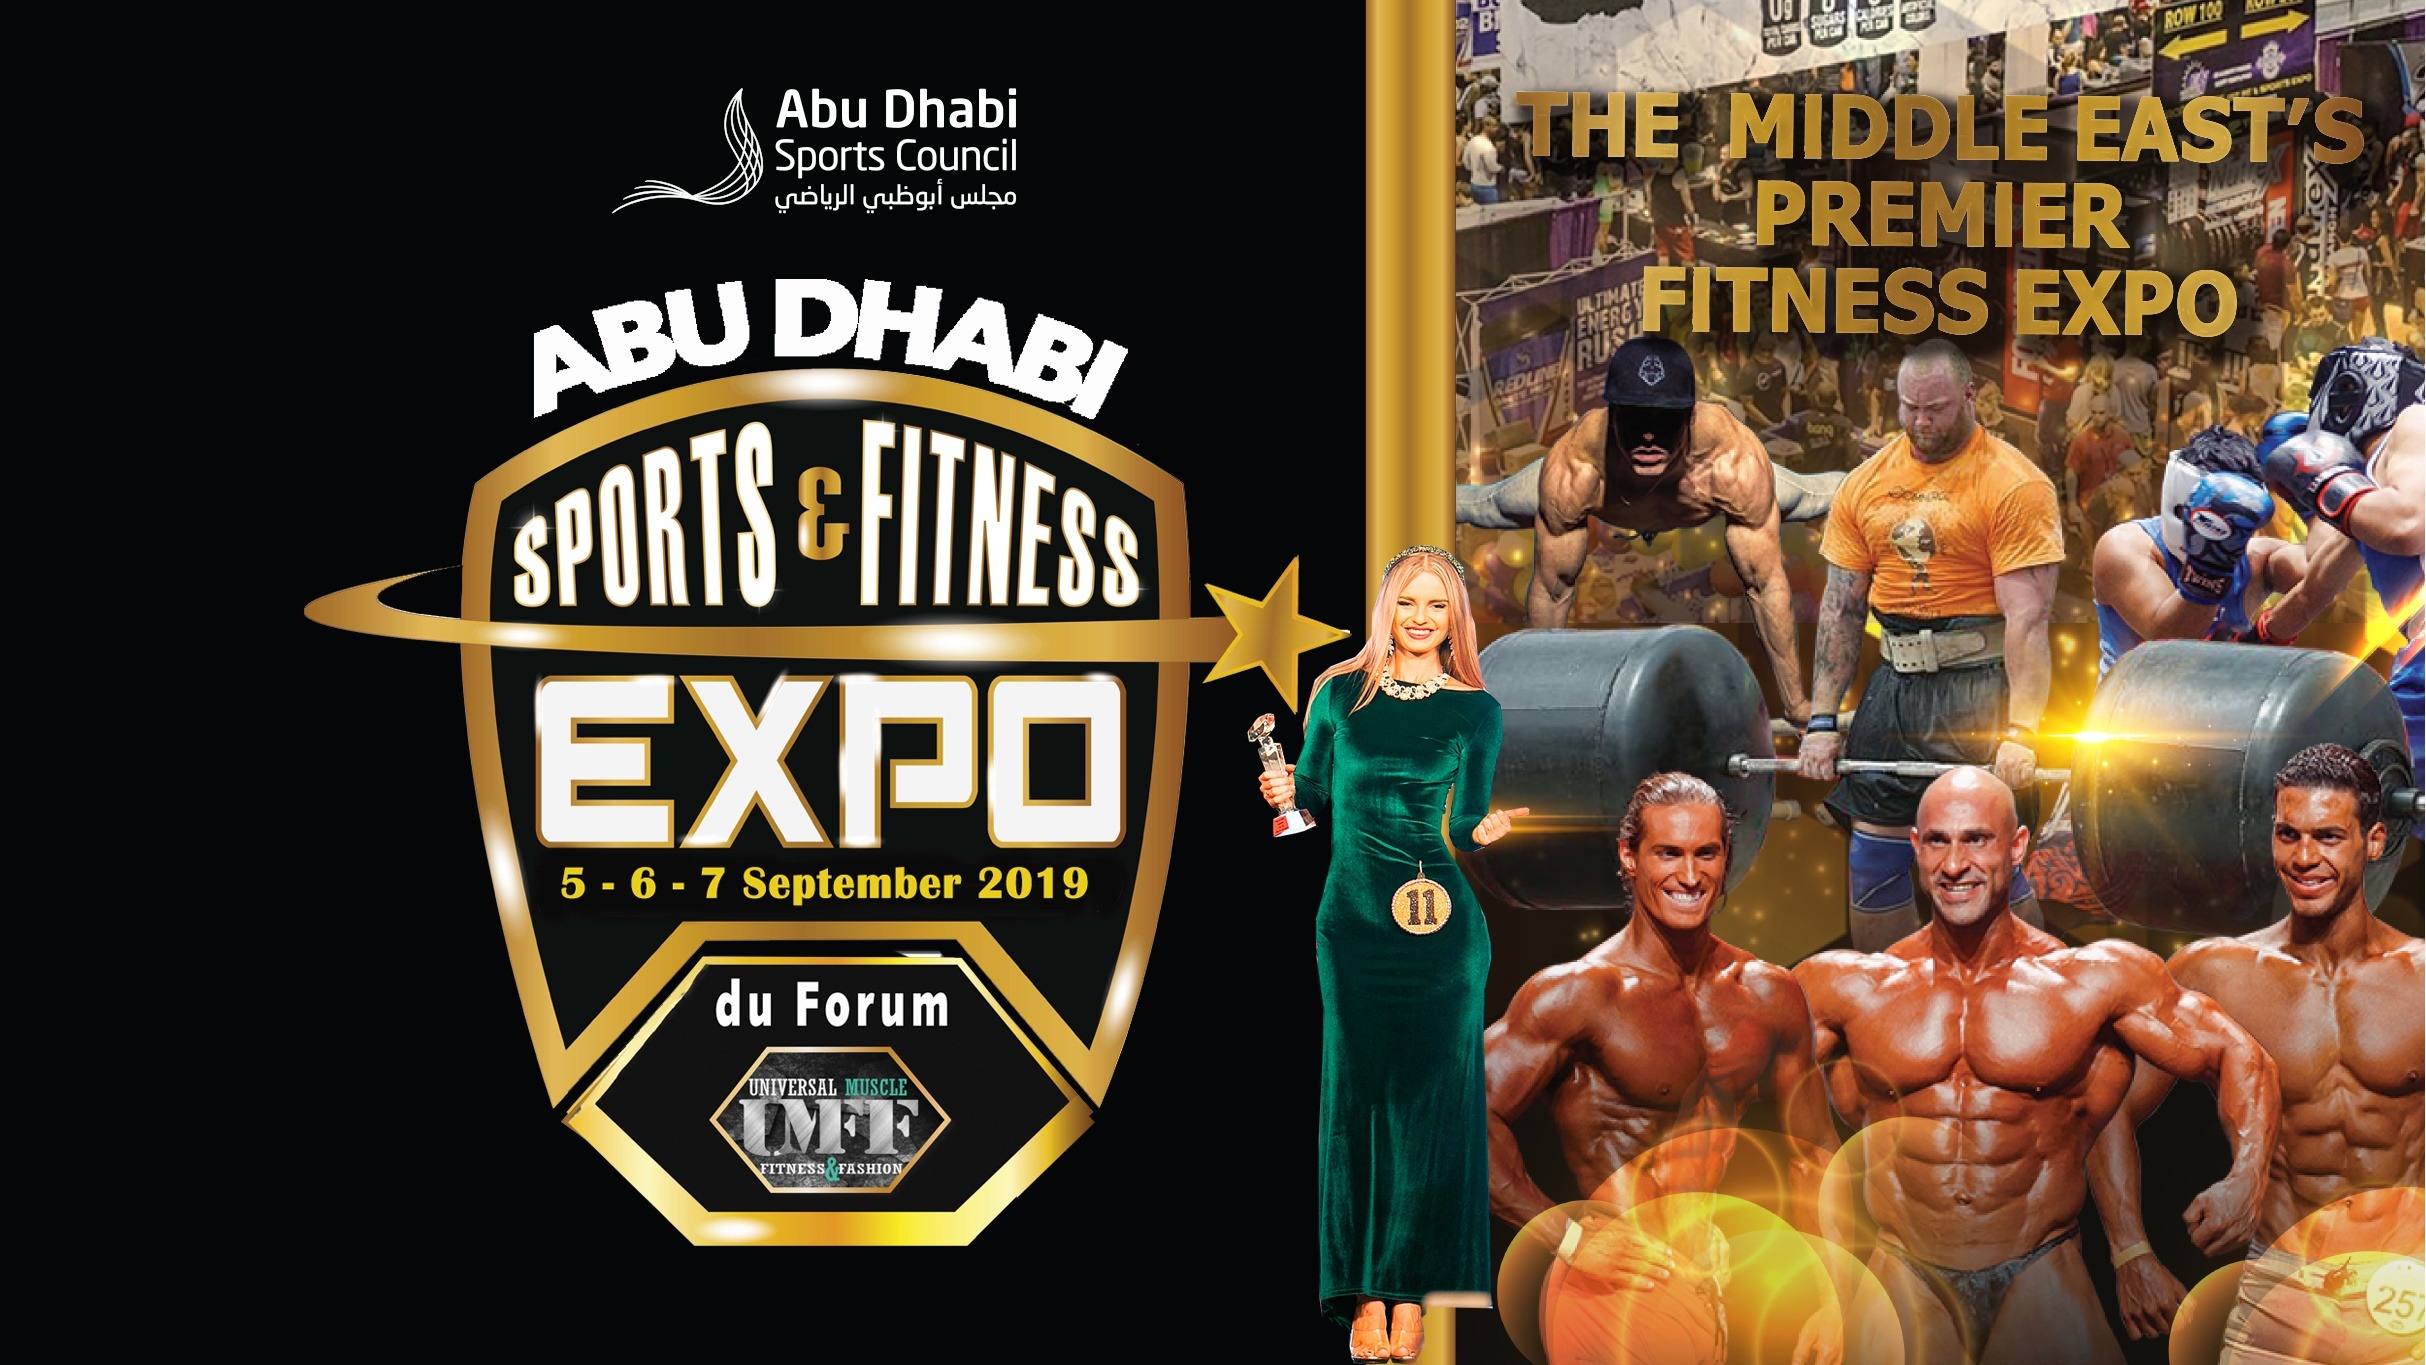 Abu Dhabi Sports and Fitness Expo 2019 - Coming Soon in UAE